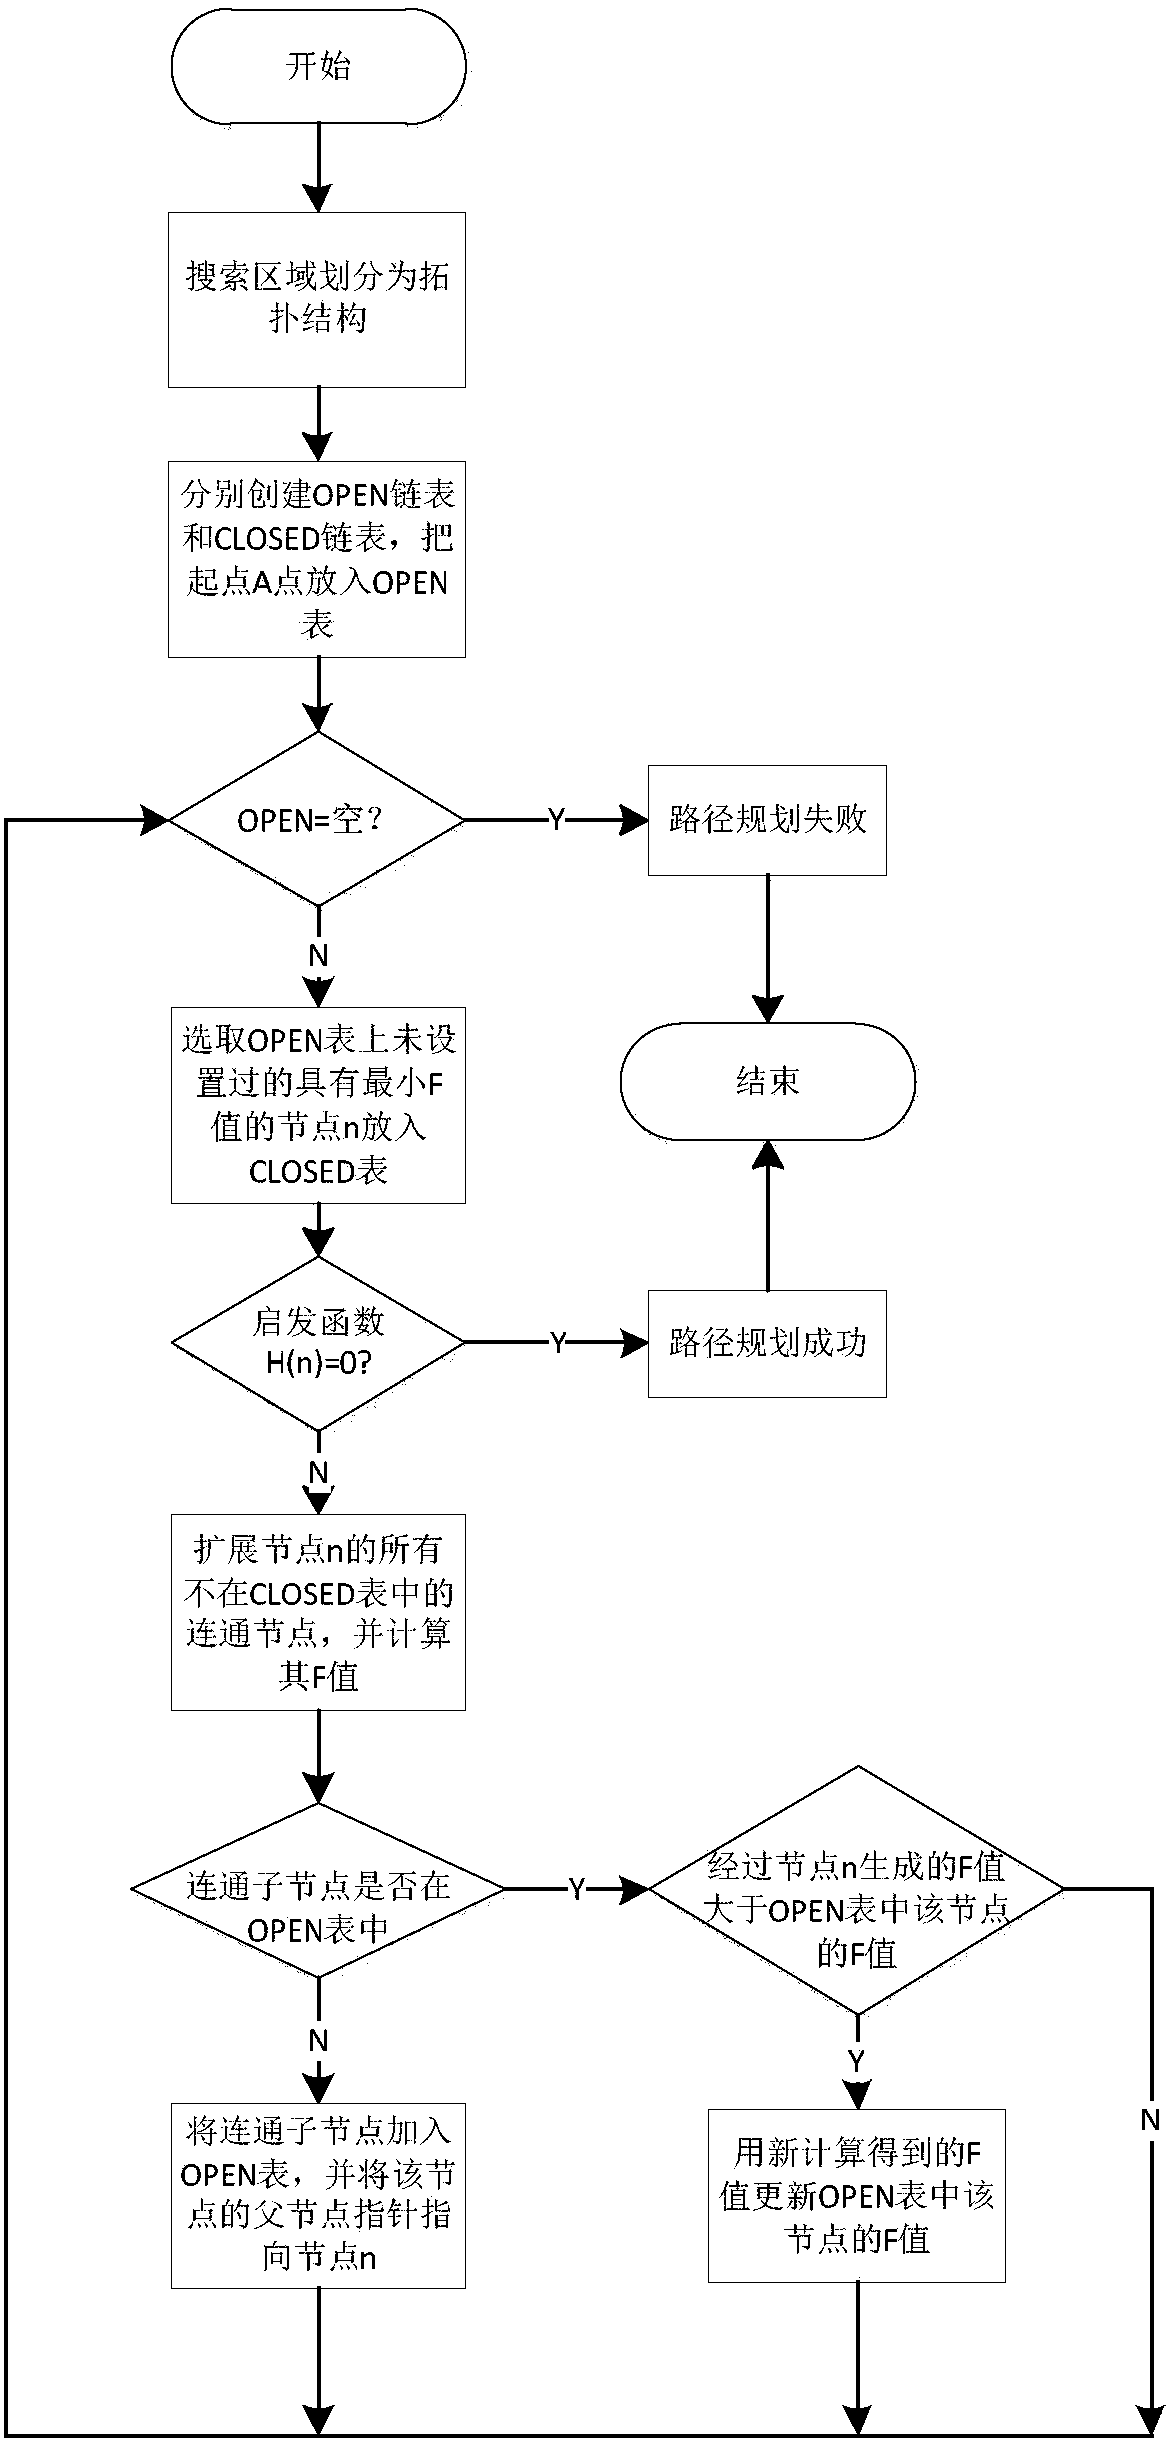 AGV (automated guide vehicle) path planning method based on A* algorithm